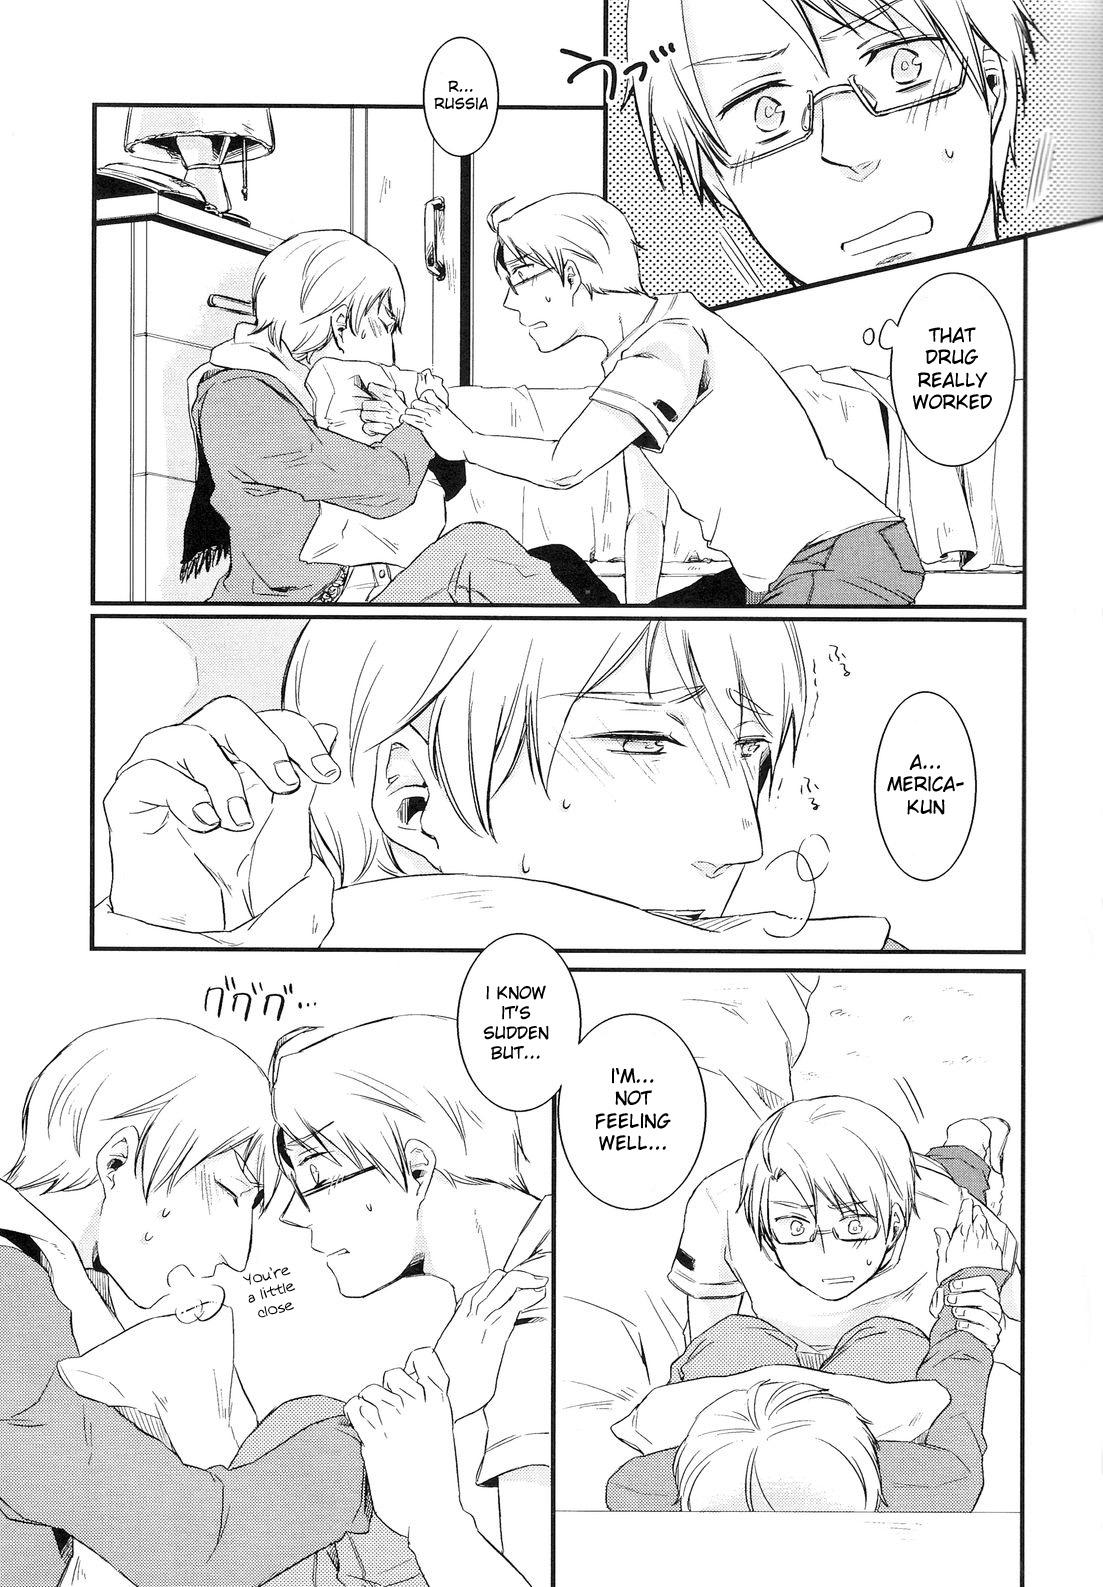 Caliente NO PROBLEM - Axis powers hetalia Doll - Page 12